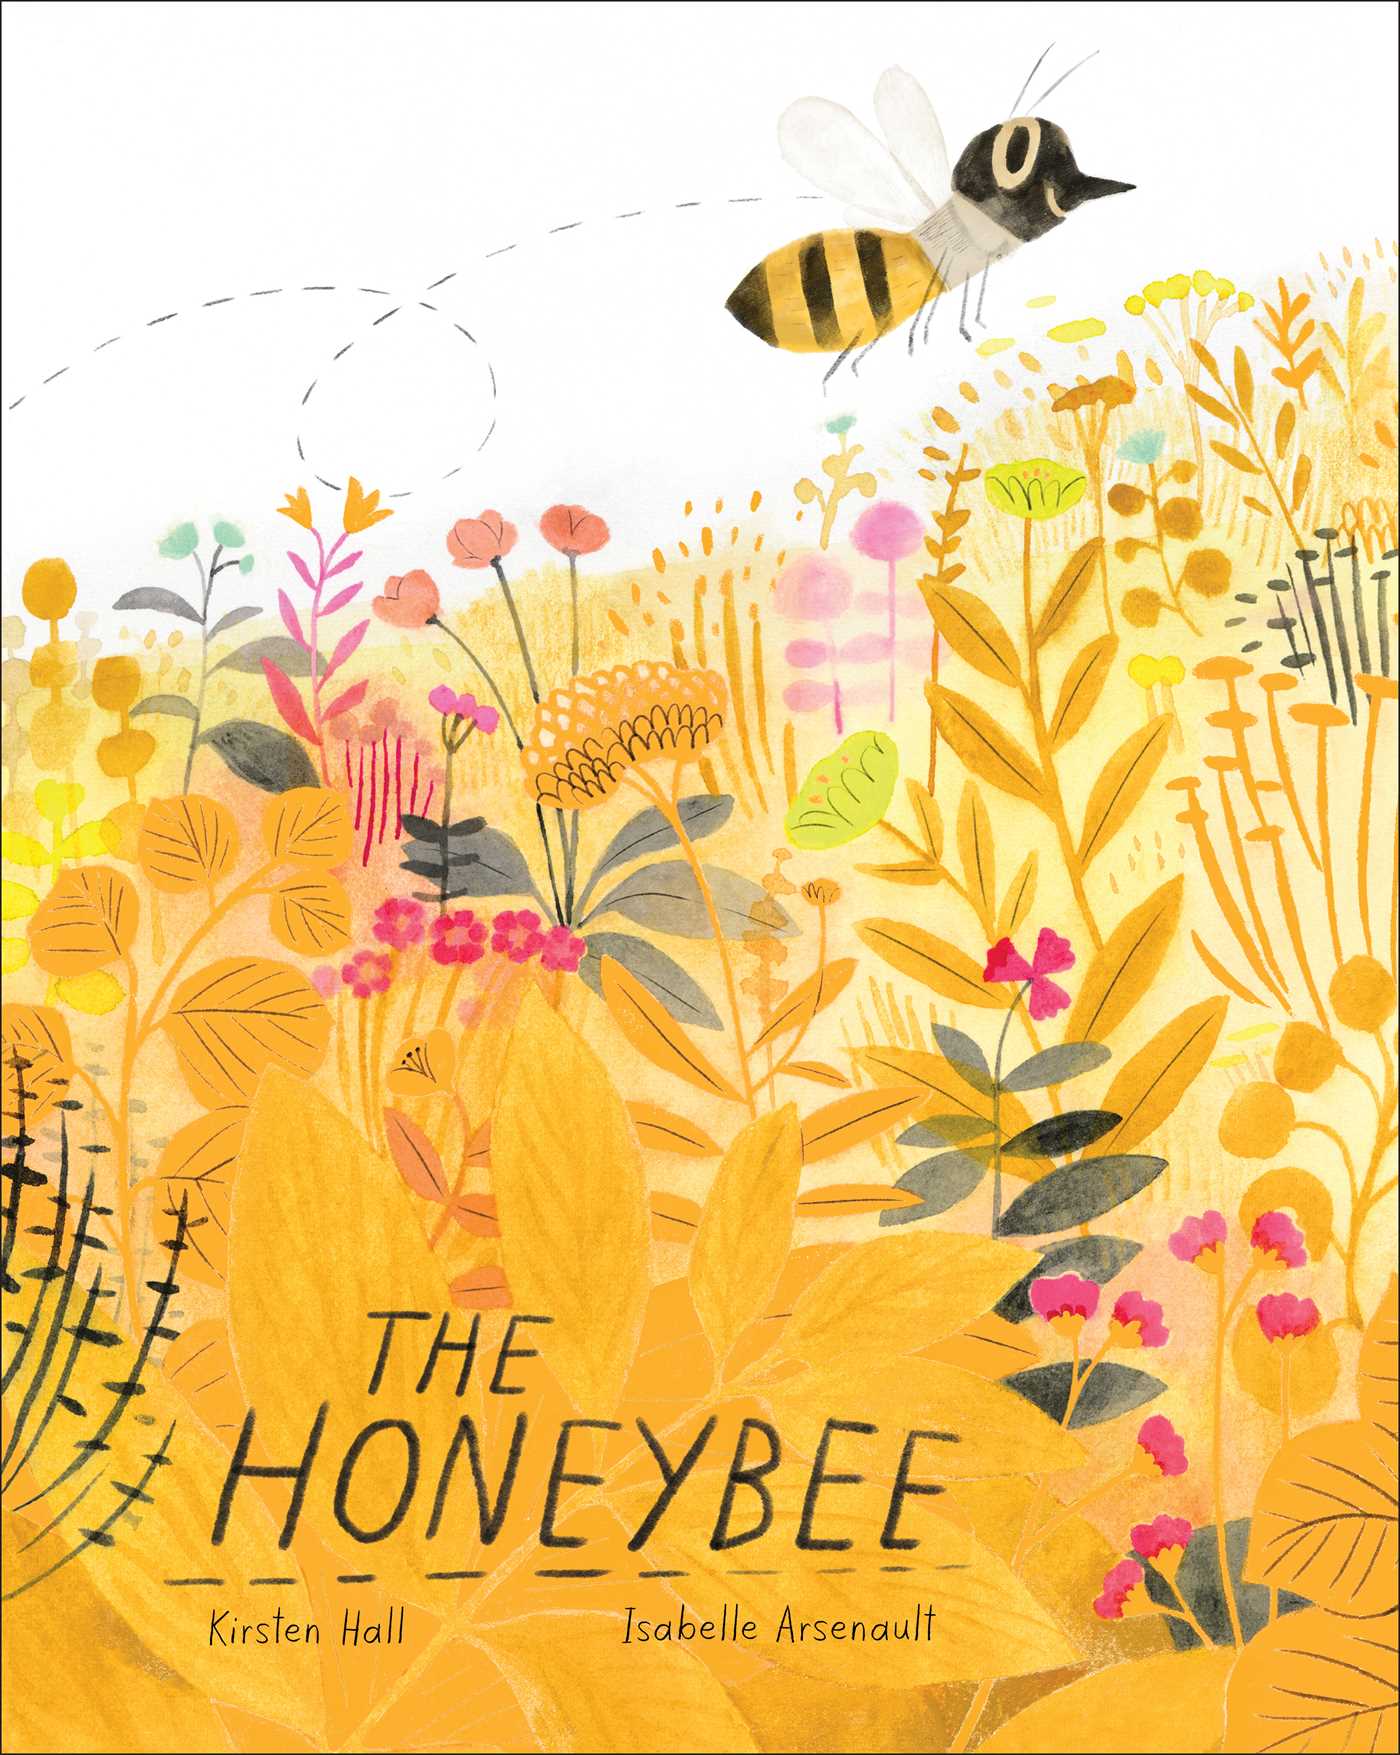 The Honeybee book cover, showing a colorful illustration of a smiling bee buzzing amongst the flowers